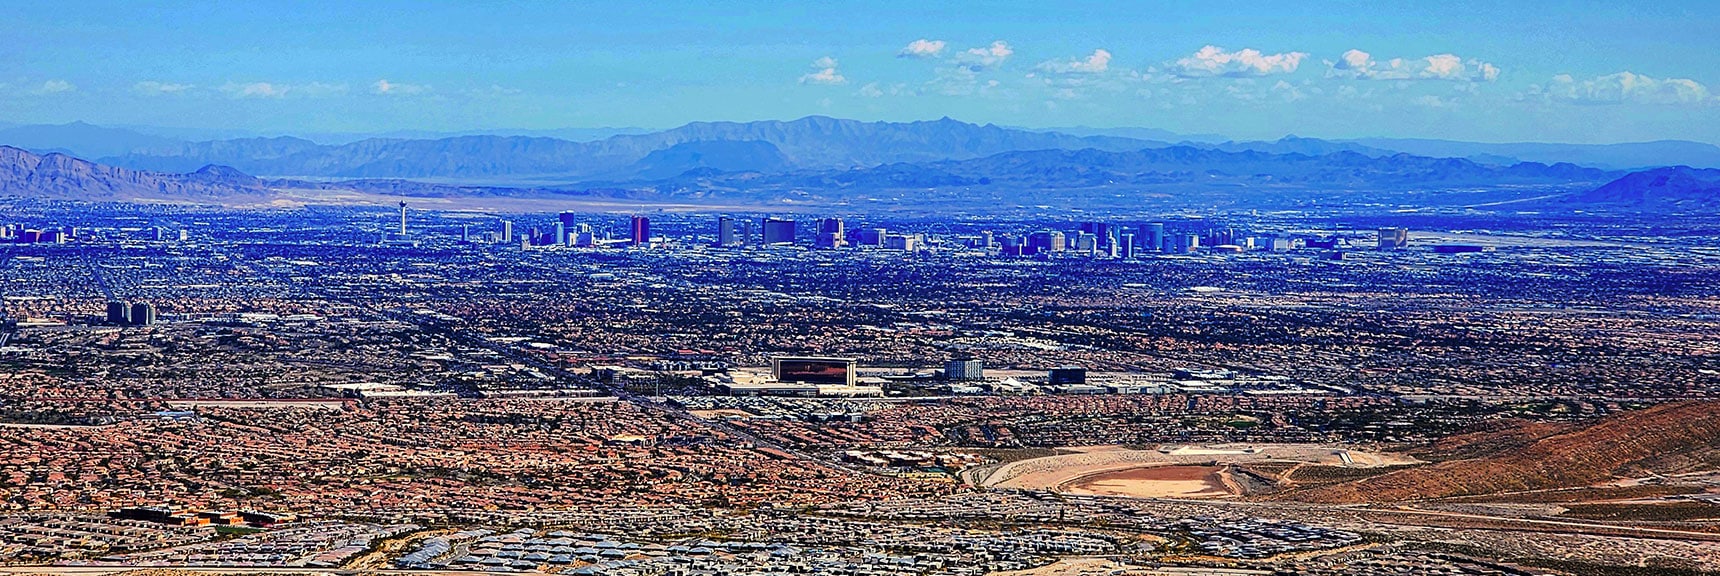 Las Vegas Strip in Light of Afternoon Sun. Red Rock Casino in Foreground. | Gray Cap Ridge Southeast Summit | La Madre Mountains Wilderness, Nevada